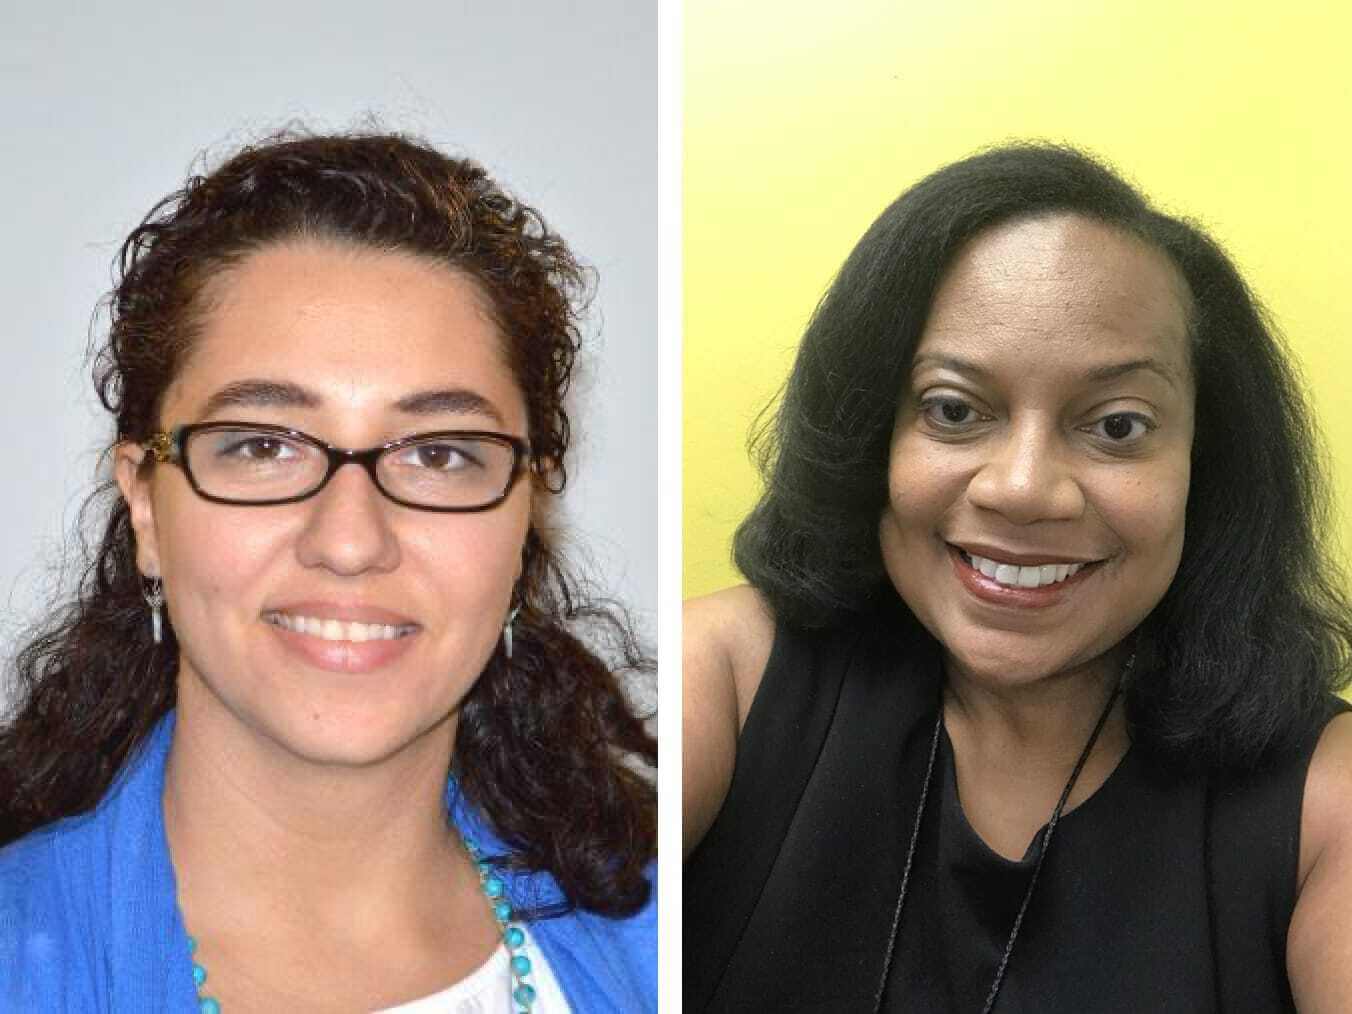 Professors Oana Rosenthal, MS, and Pearl Myers, MD, are TouroCOM Middletown's 2020 Teachers of the Year.